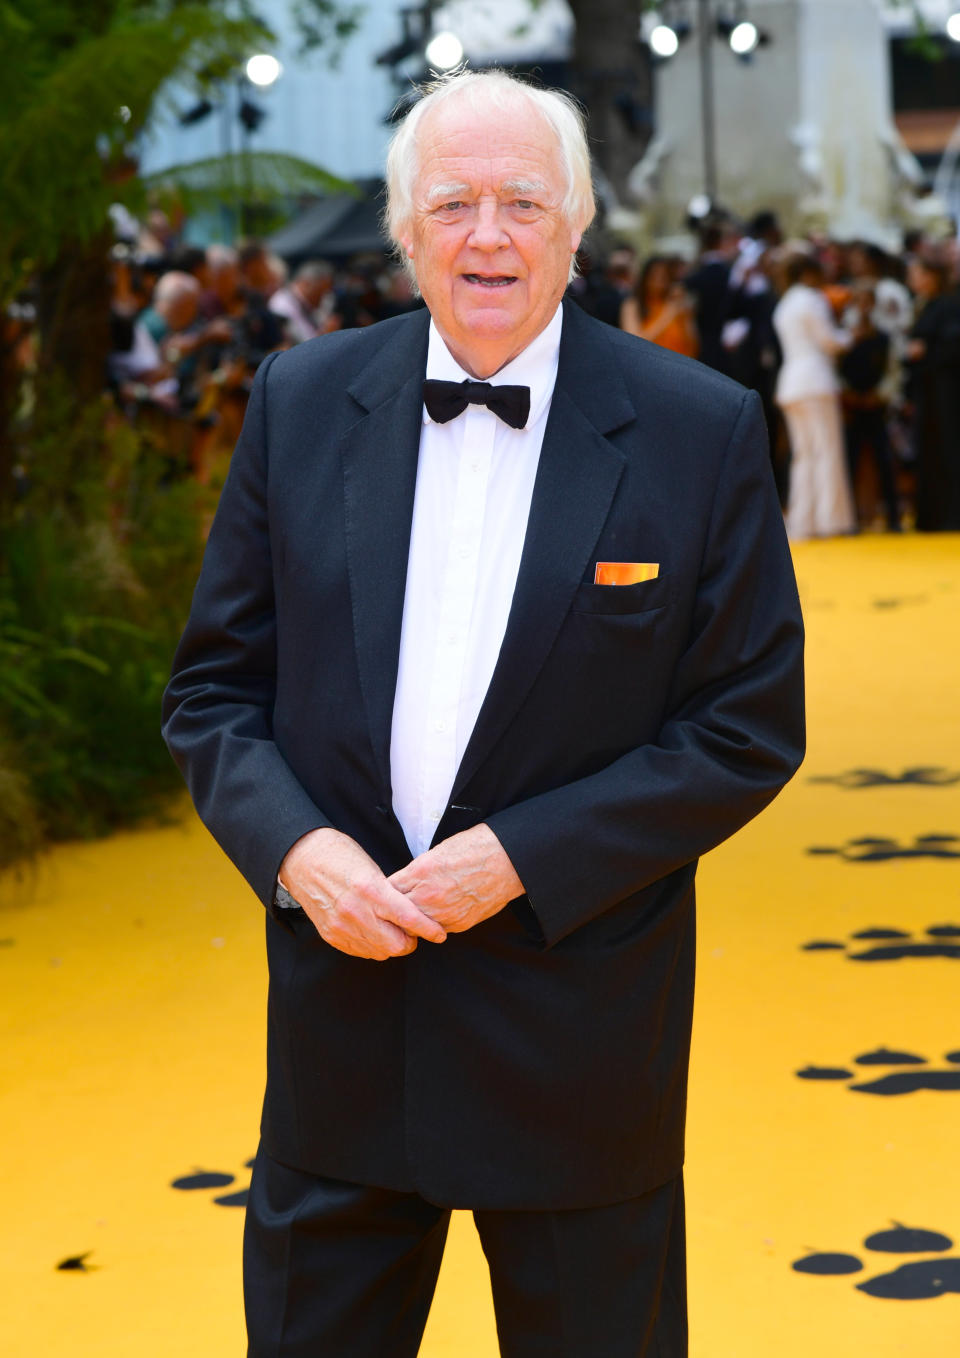 Sir Tim Rice attending Disney's The Lion King European Premiere held in Leicester Square, London.